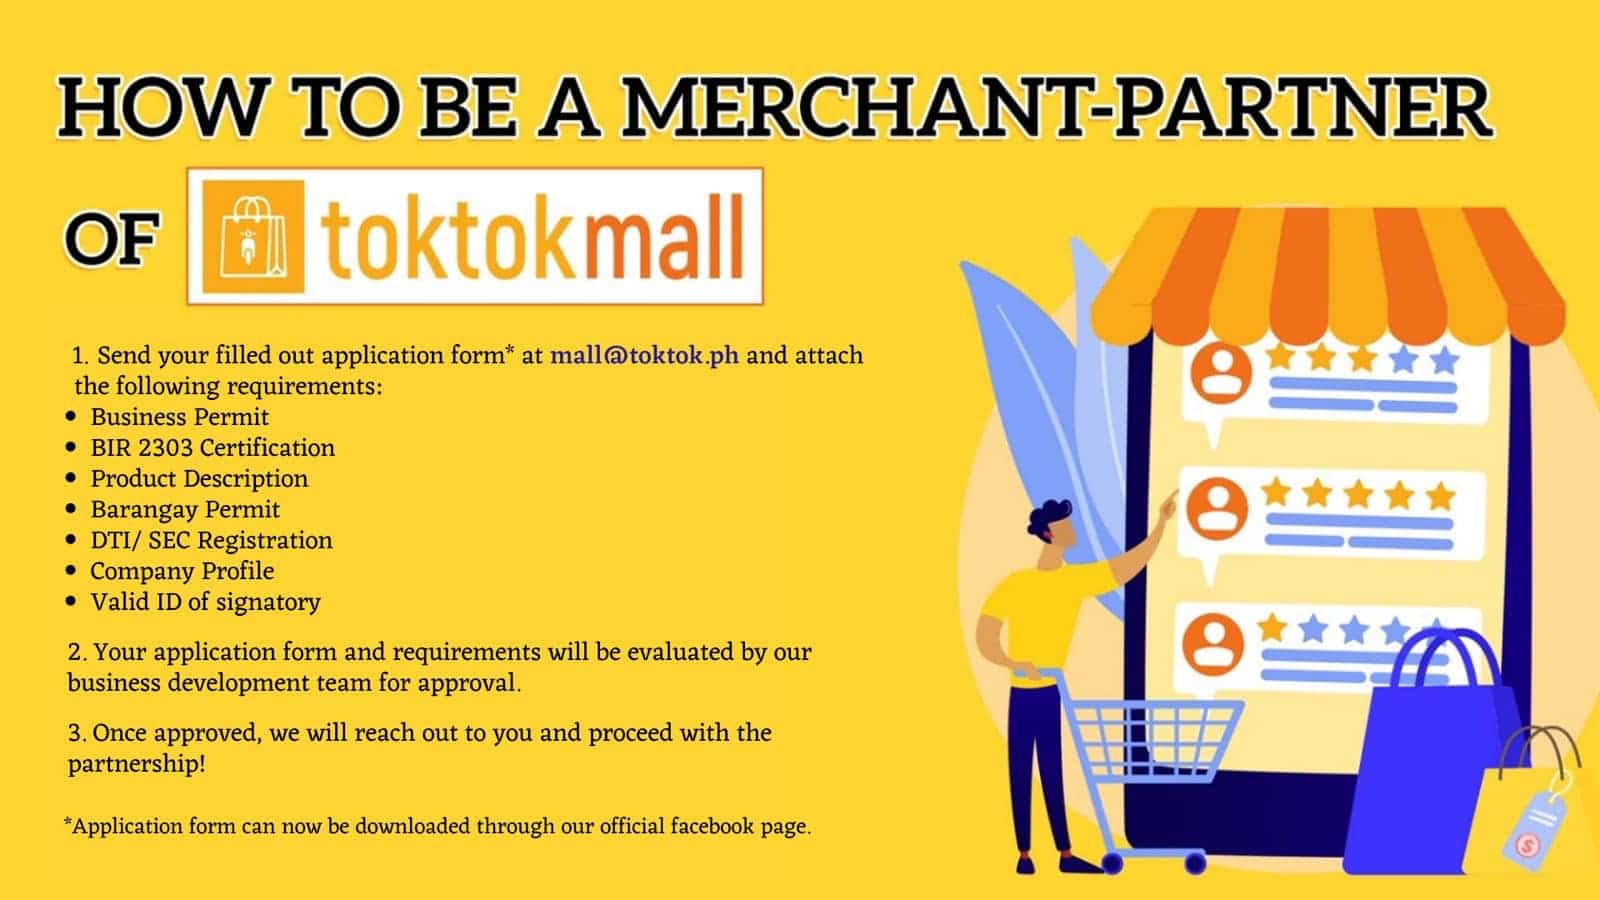 How to be a Merchant-Partner of TokTokMall